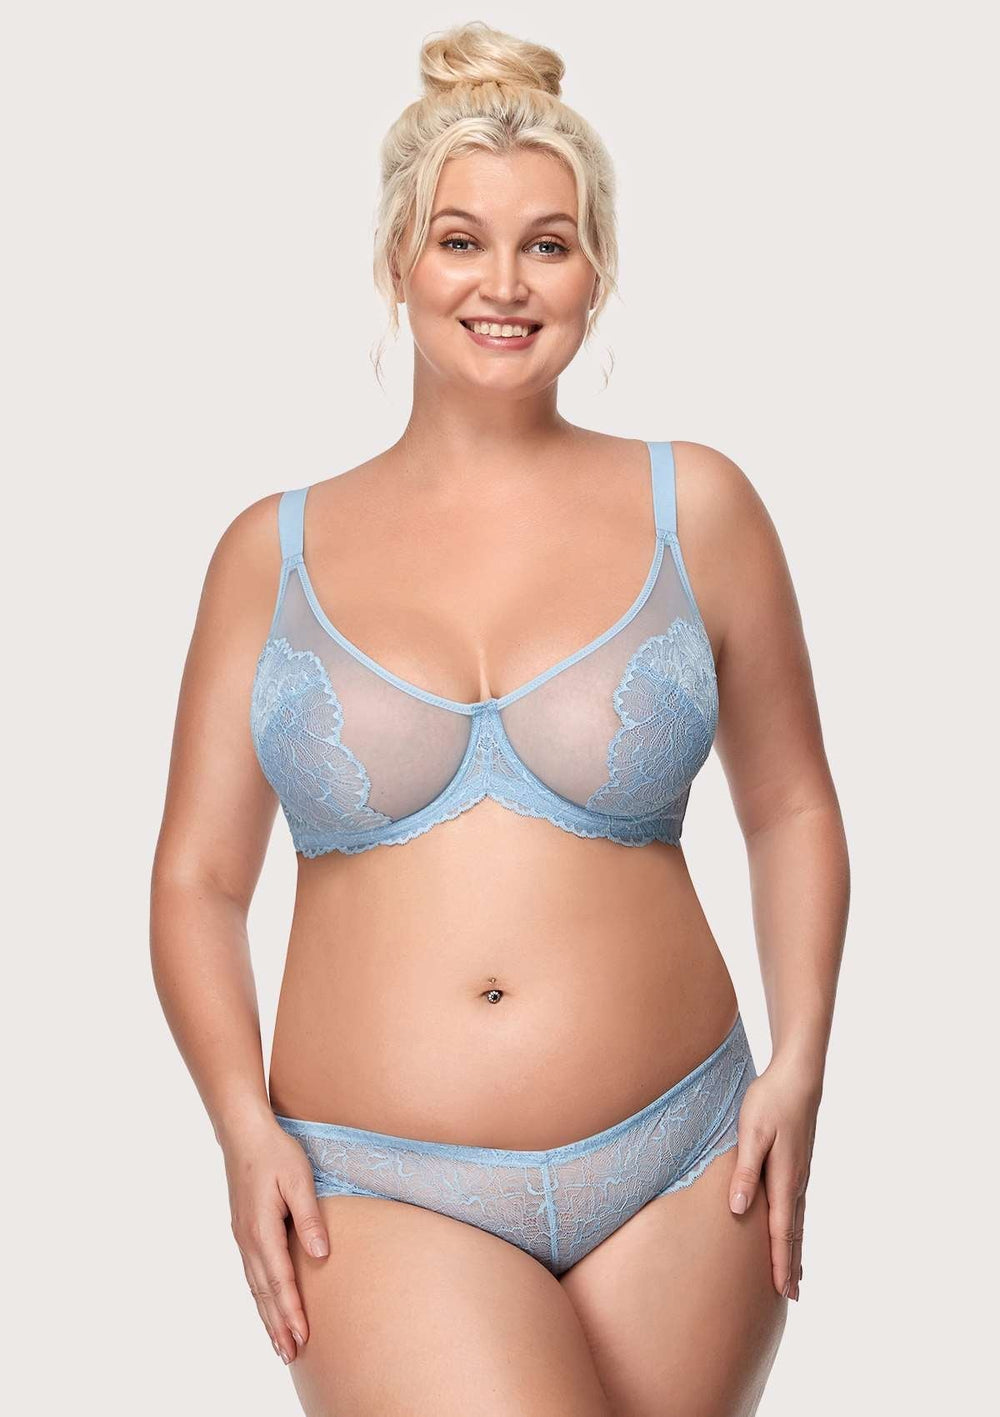 Style #106: Lace Crepeset banded Bra Underwire - C C's Lingerie